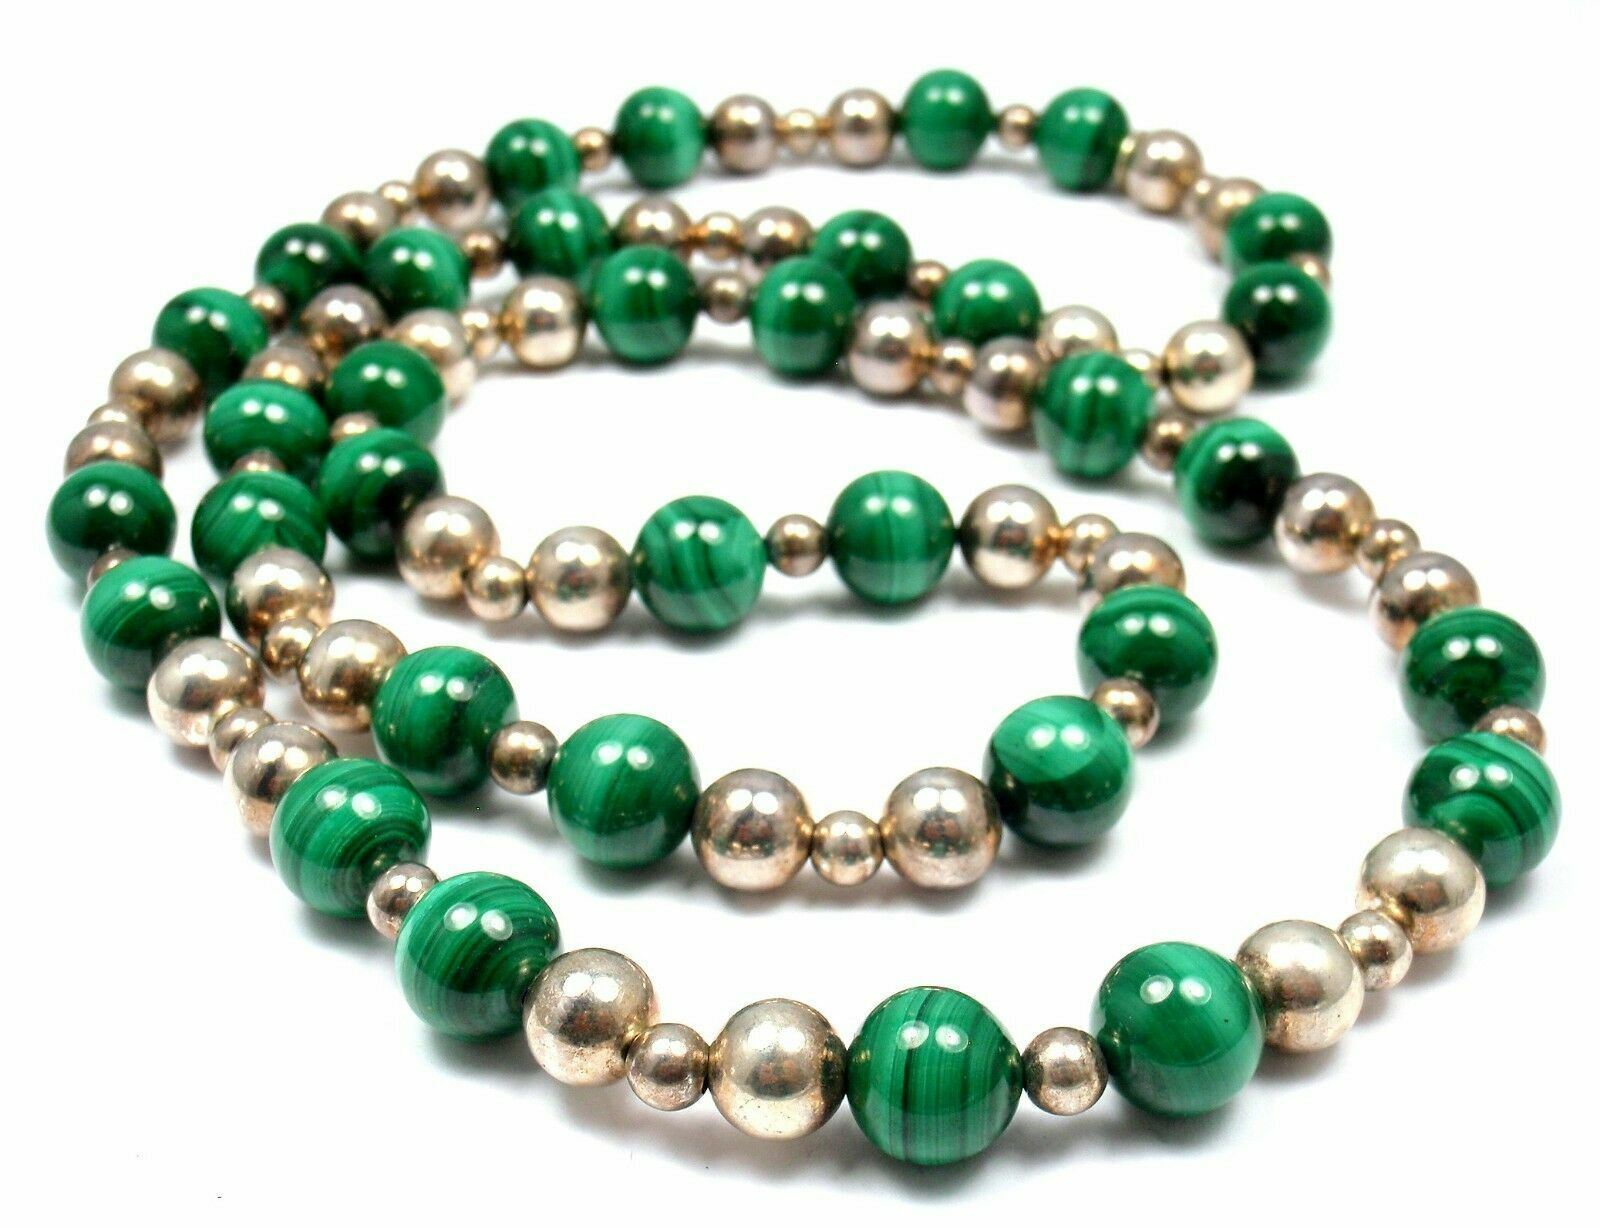 Tiffany & Co. Jewelry & Watches:Fine Jewelry:Necklaces & Pendants Rare Tiffany & Co. Sterling Silver Green Malachite Bead Necklace 30"